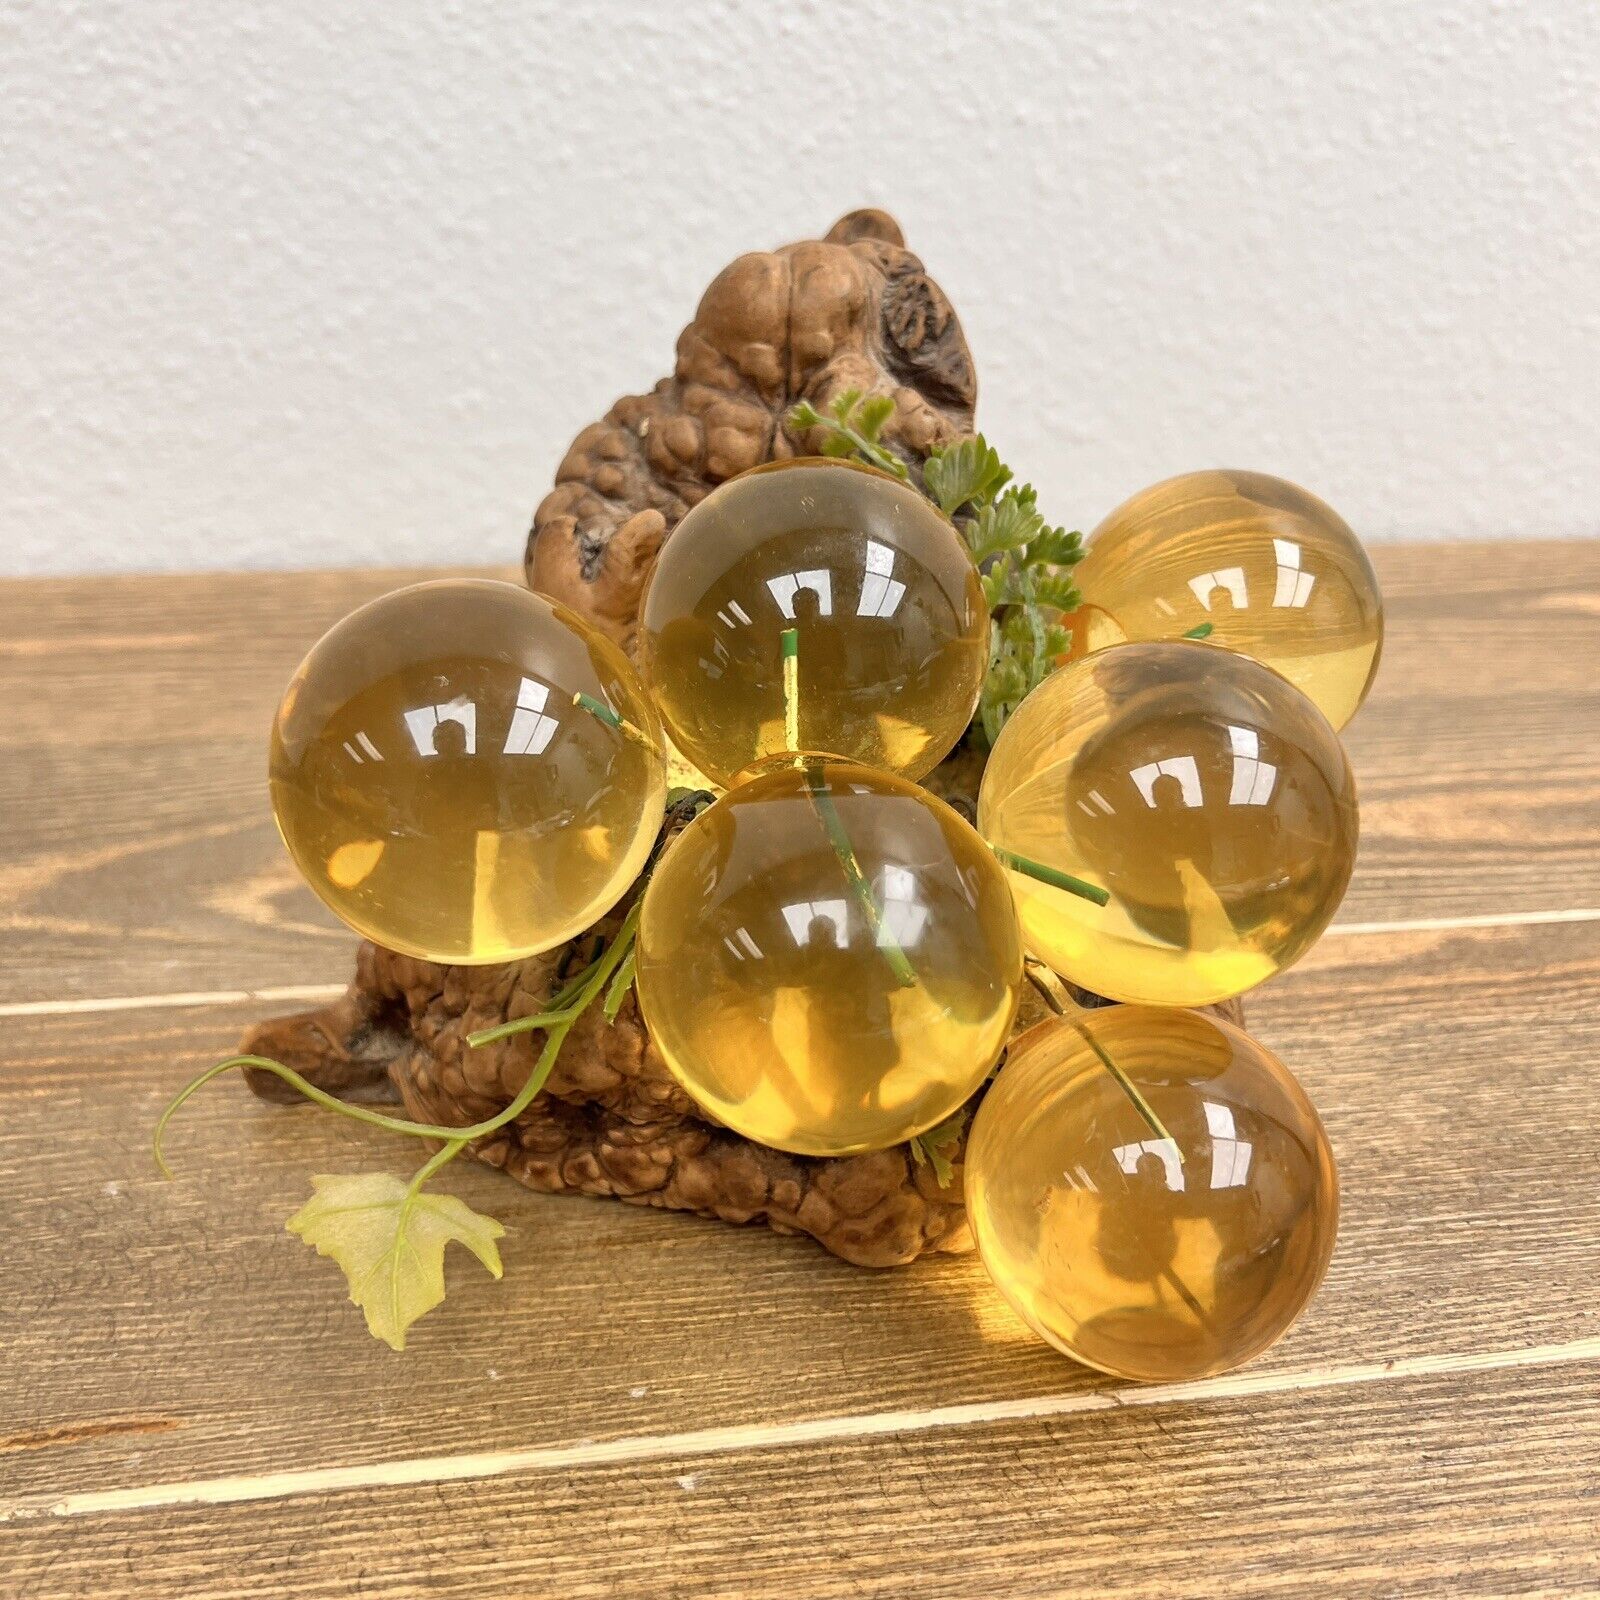 Vintage Lucite Acrylic Grapes on Wood Table Decor